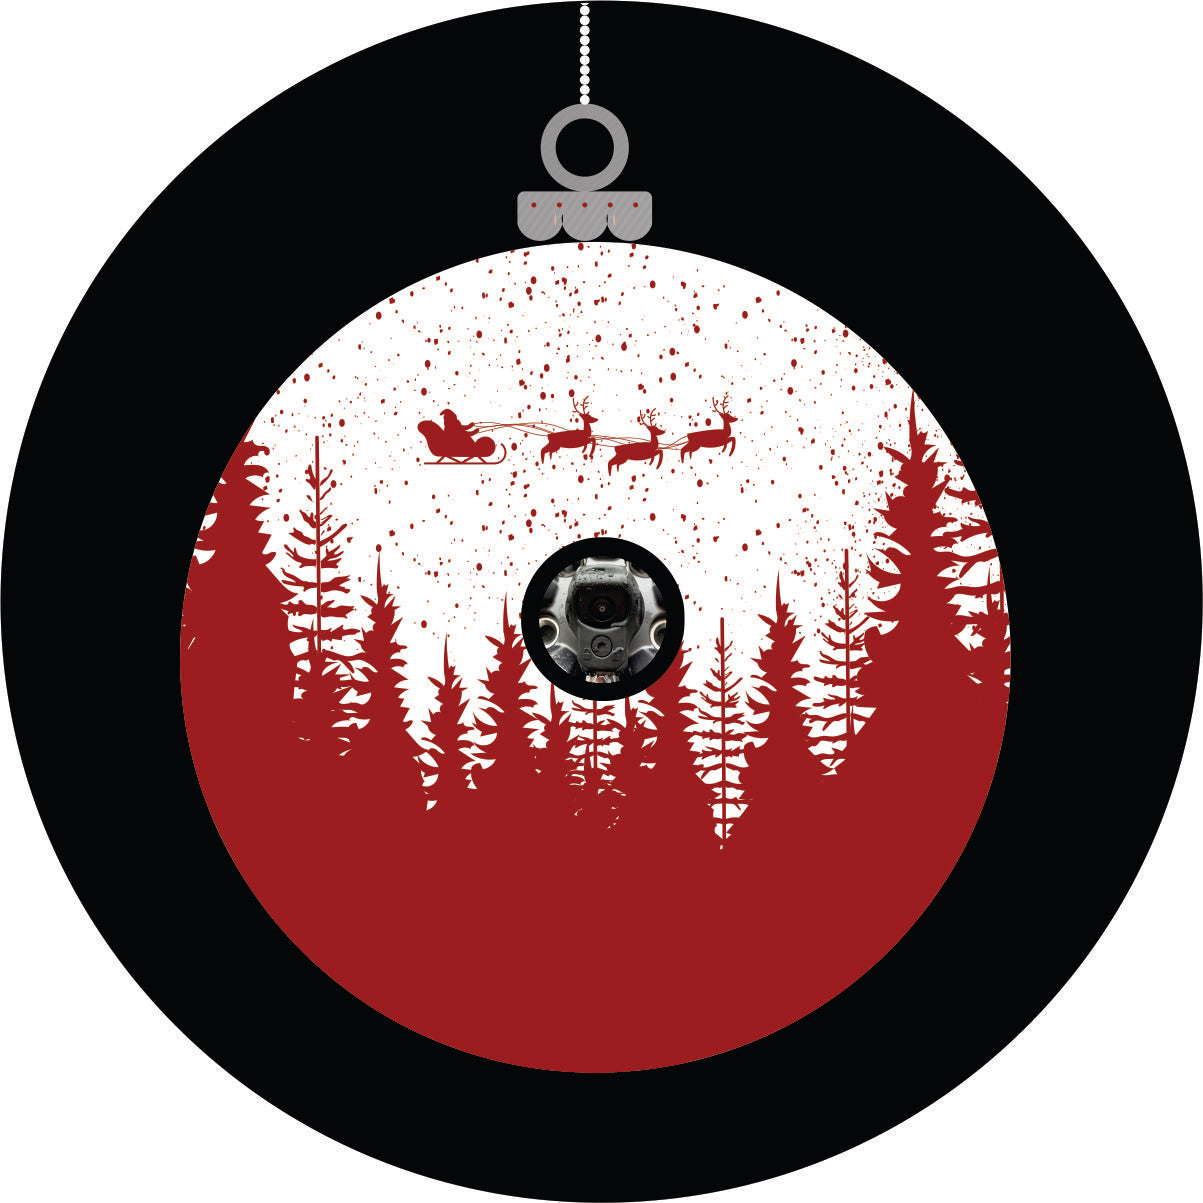 Spare tire cover for Jeep of a red silhouette of Santa Claus flying over the forest and snow as a Christmas tree globe ornament with a back up camera hole.